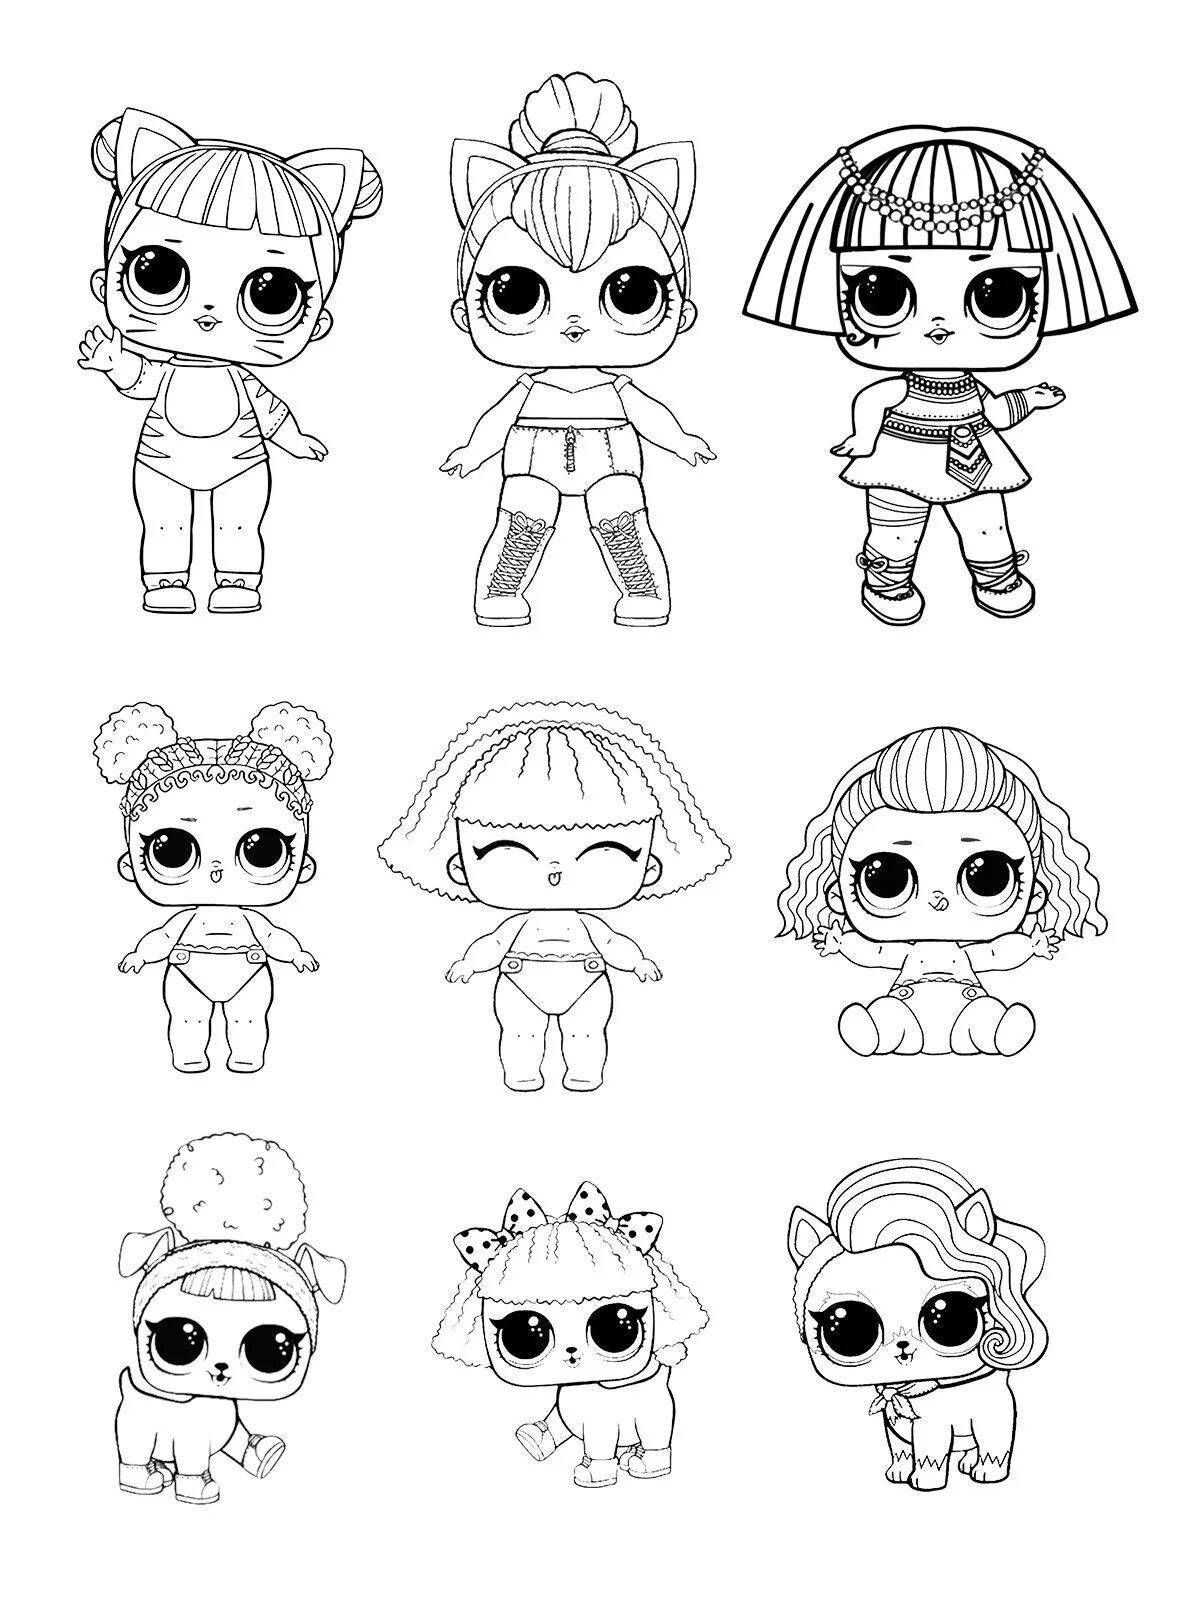 Coloring book dazzling little lol doll